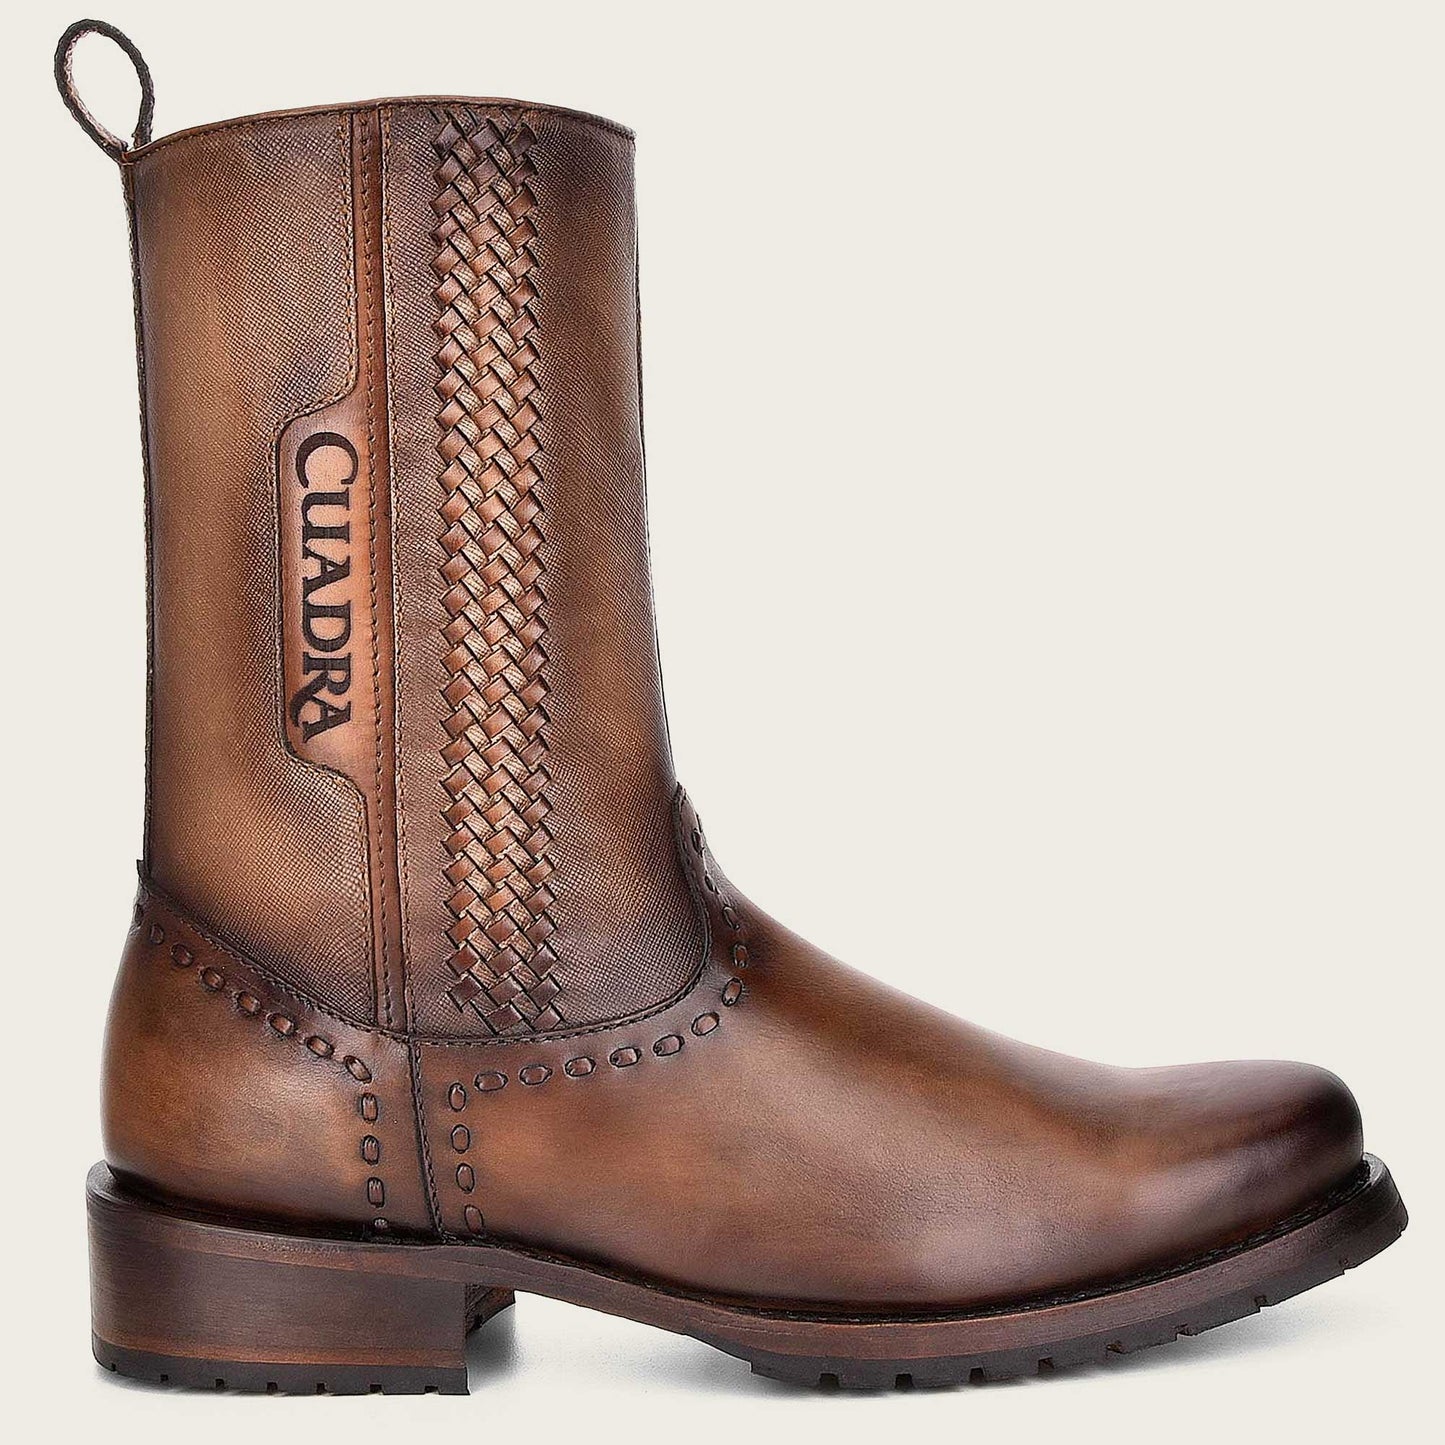 A skillfully crafted boot made of honey-colored leather with intricate handwoven details